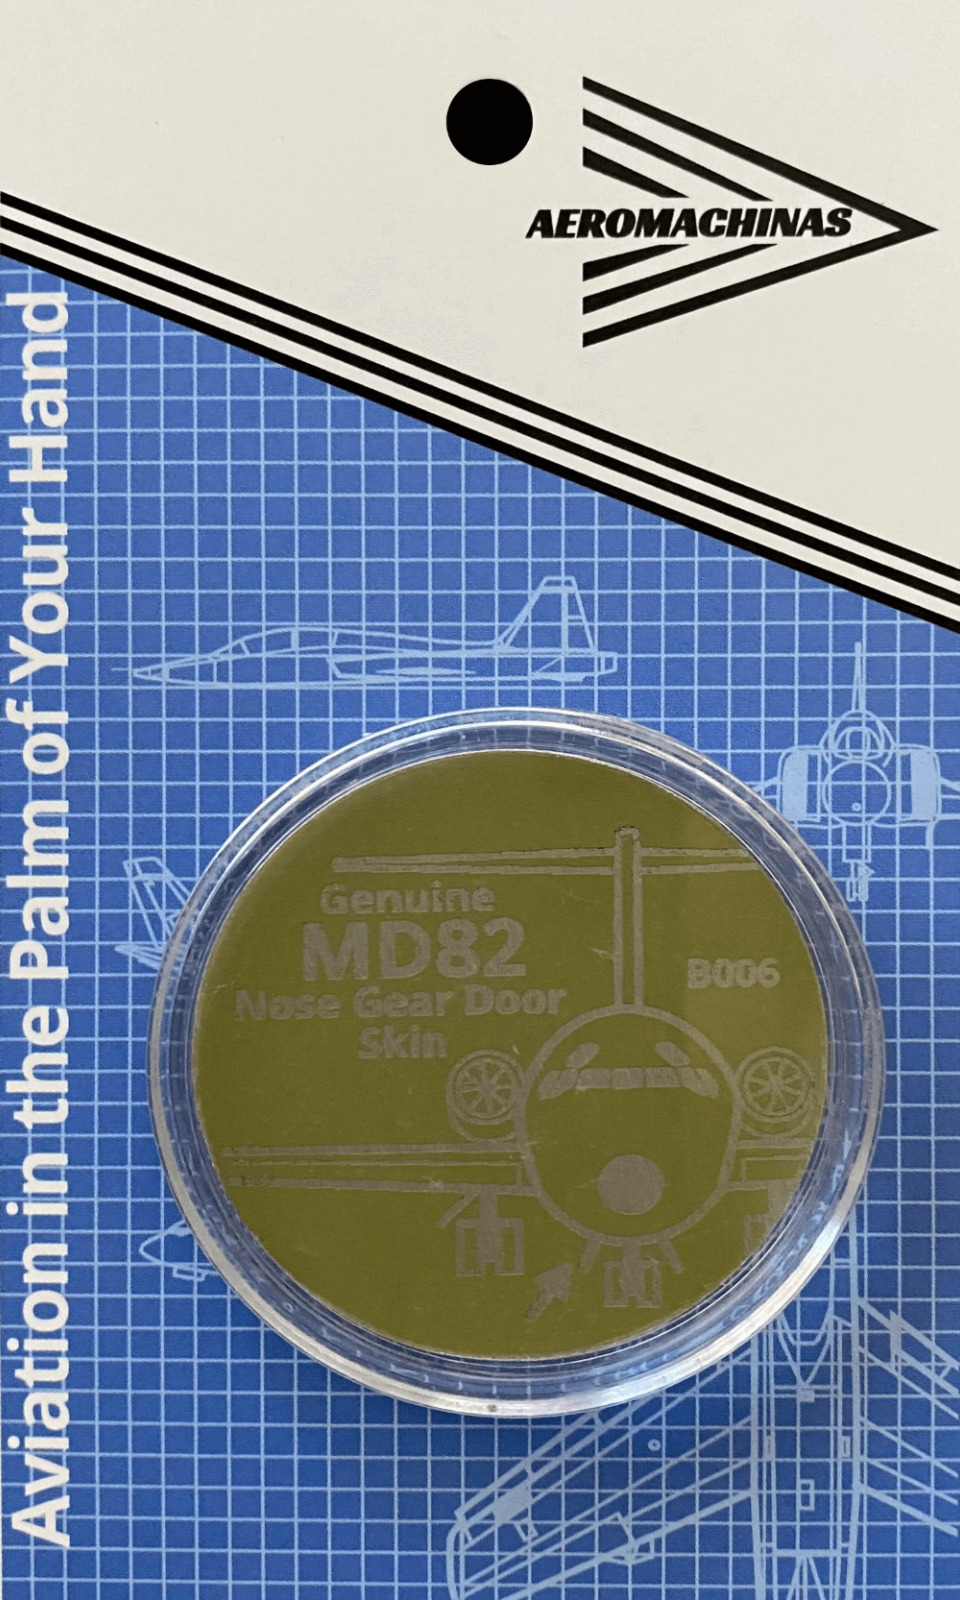 MD-82 Challenge Coin Real Airplane Skin Great Gift for Aviation Lovers